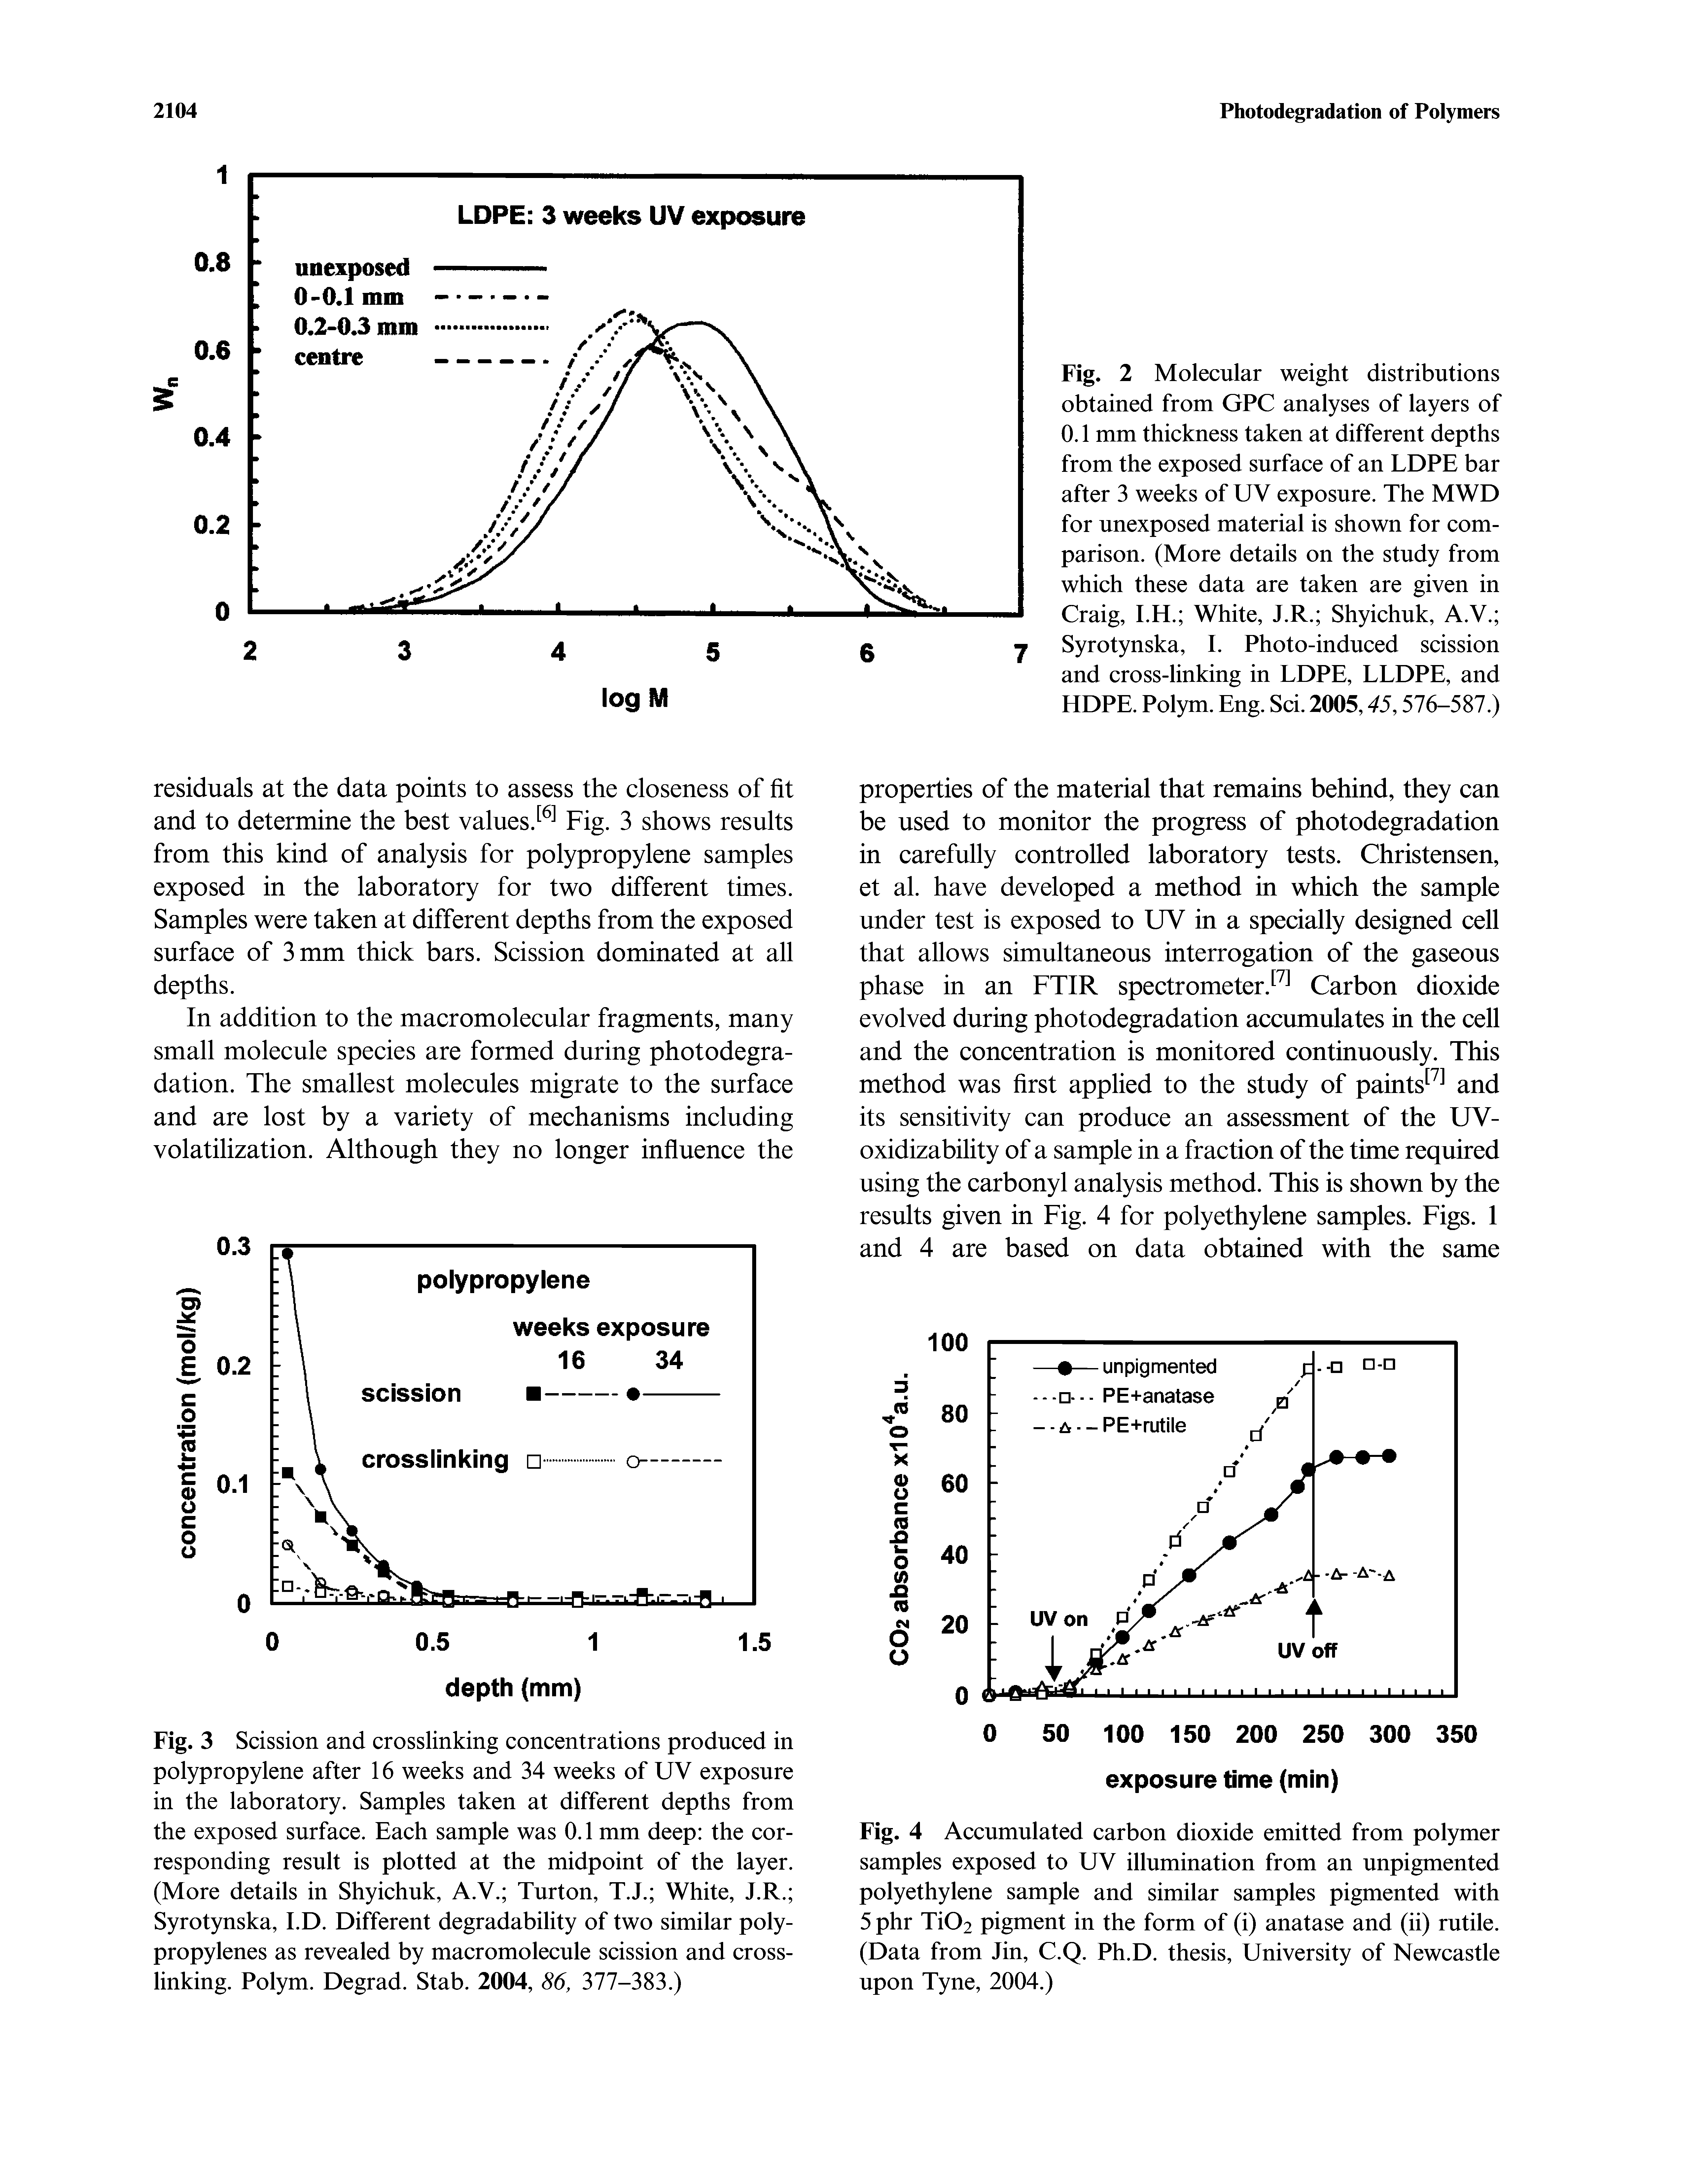 Fig. 3 Scission and crosslinking concentrations produced in polypropylene after 16 weeks and 34 weeks of UV exposure in the laboratory. Samples taken at different depths from the exposed surface. Each sample was 0.1 mm deep the corresponding result is plotted at the midpoint of the layer. (More details in Shyichuk, A.V. Turton, T.J. White, J.R. Syrotynska, I.D. Different degradability of two similar polypropylenes as revealed by macromolecule scission and cross-linking. Polym. Degrad. Stab. 2004, 86, 377-383.)...